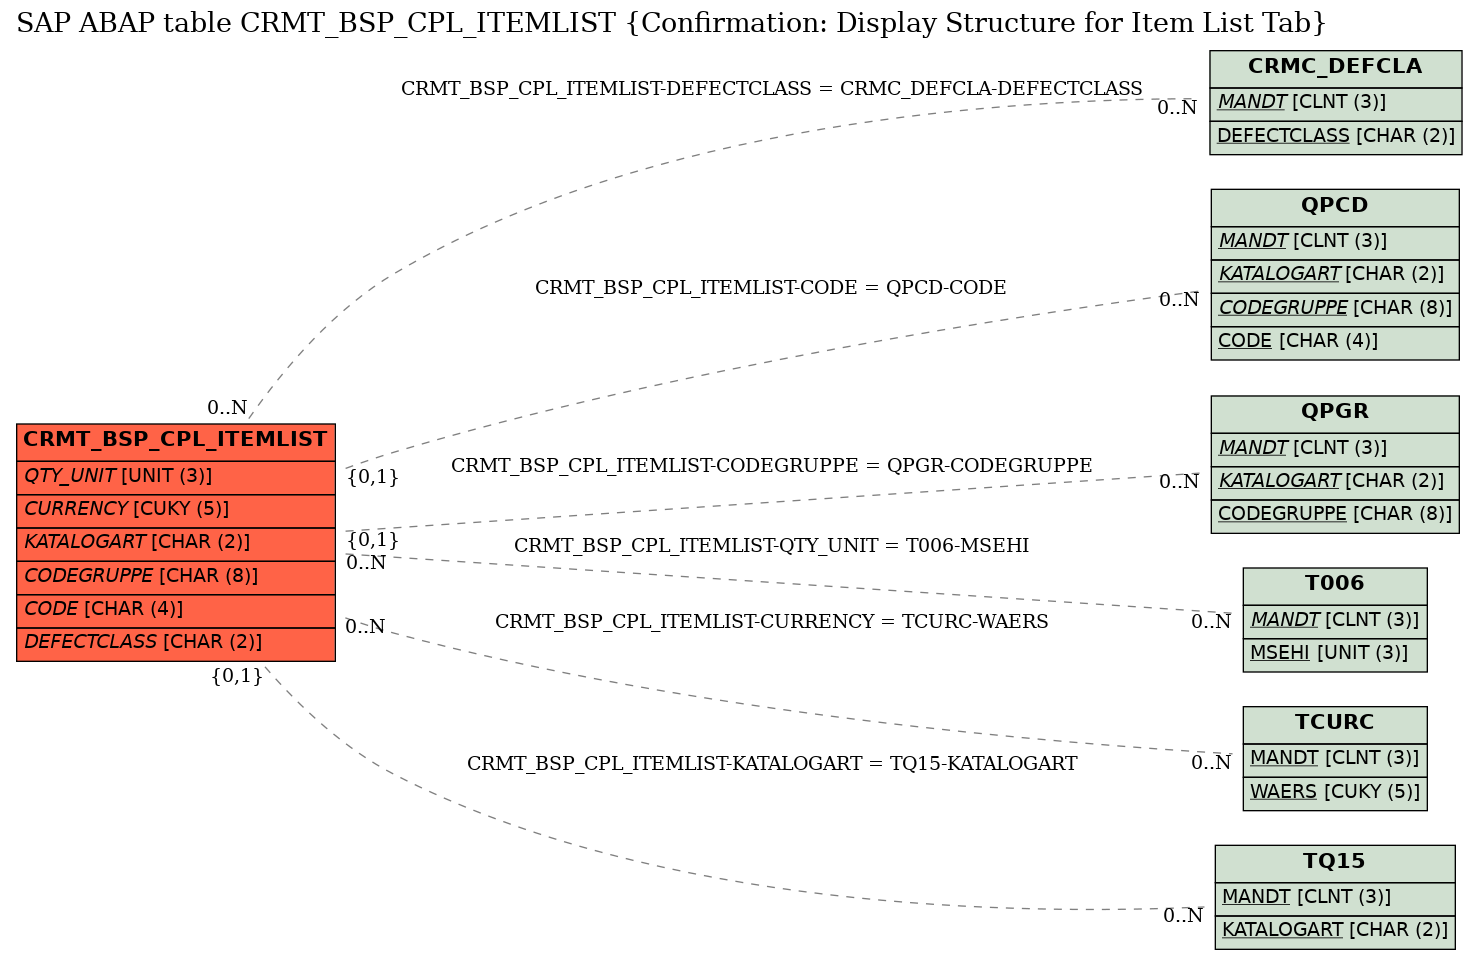 E-R Diagram for table CRMT_BSP_CPL_ITEMLIST (Confirmation: Display Structure for Item List Tab)